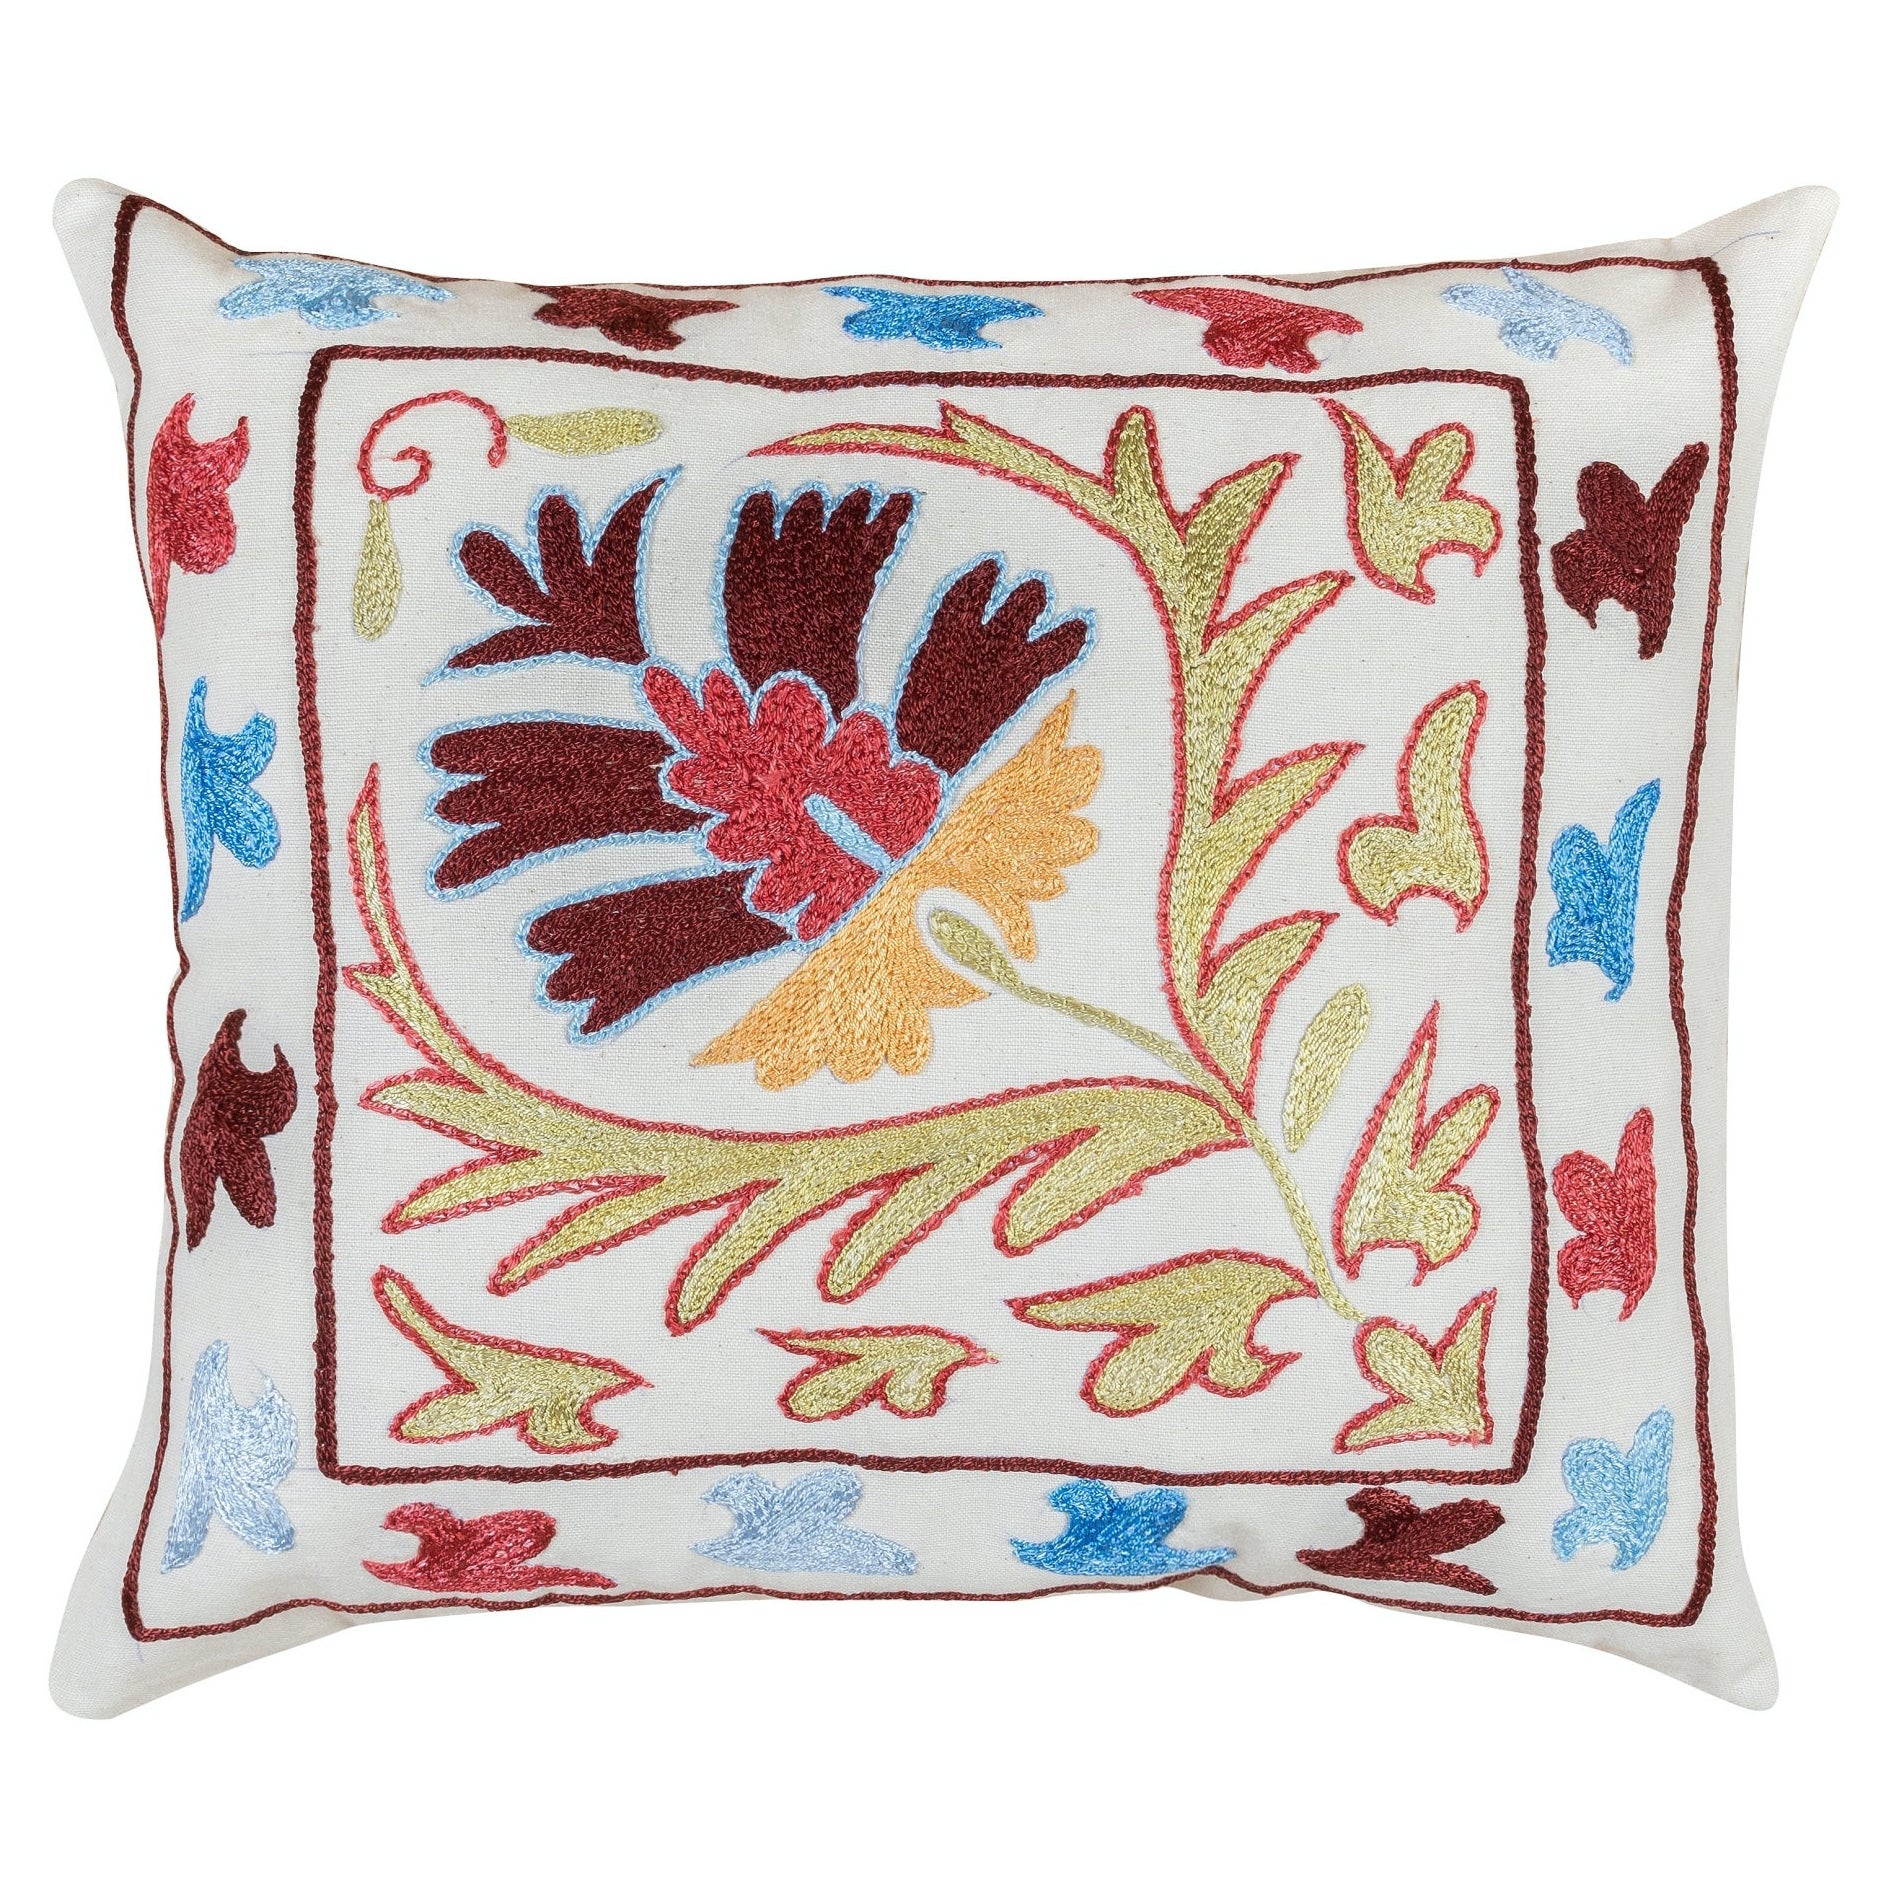 Colorful Hand Embroidered Silk Cushion Cover, Suzani Throw Pillow Cover For Sale